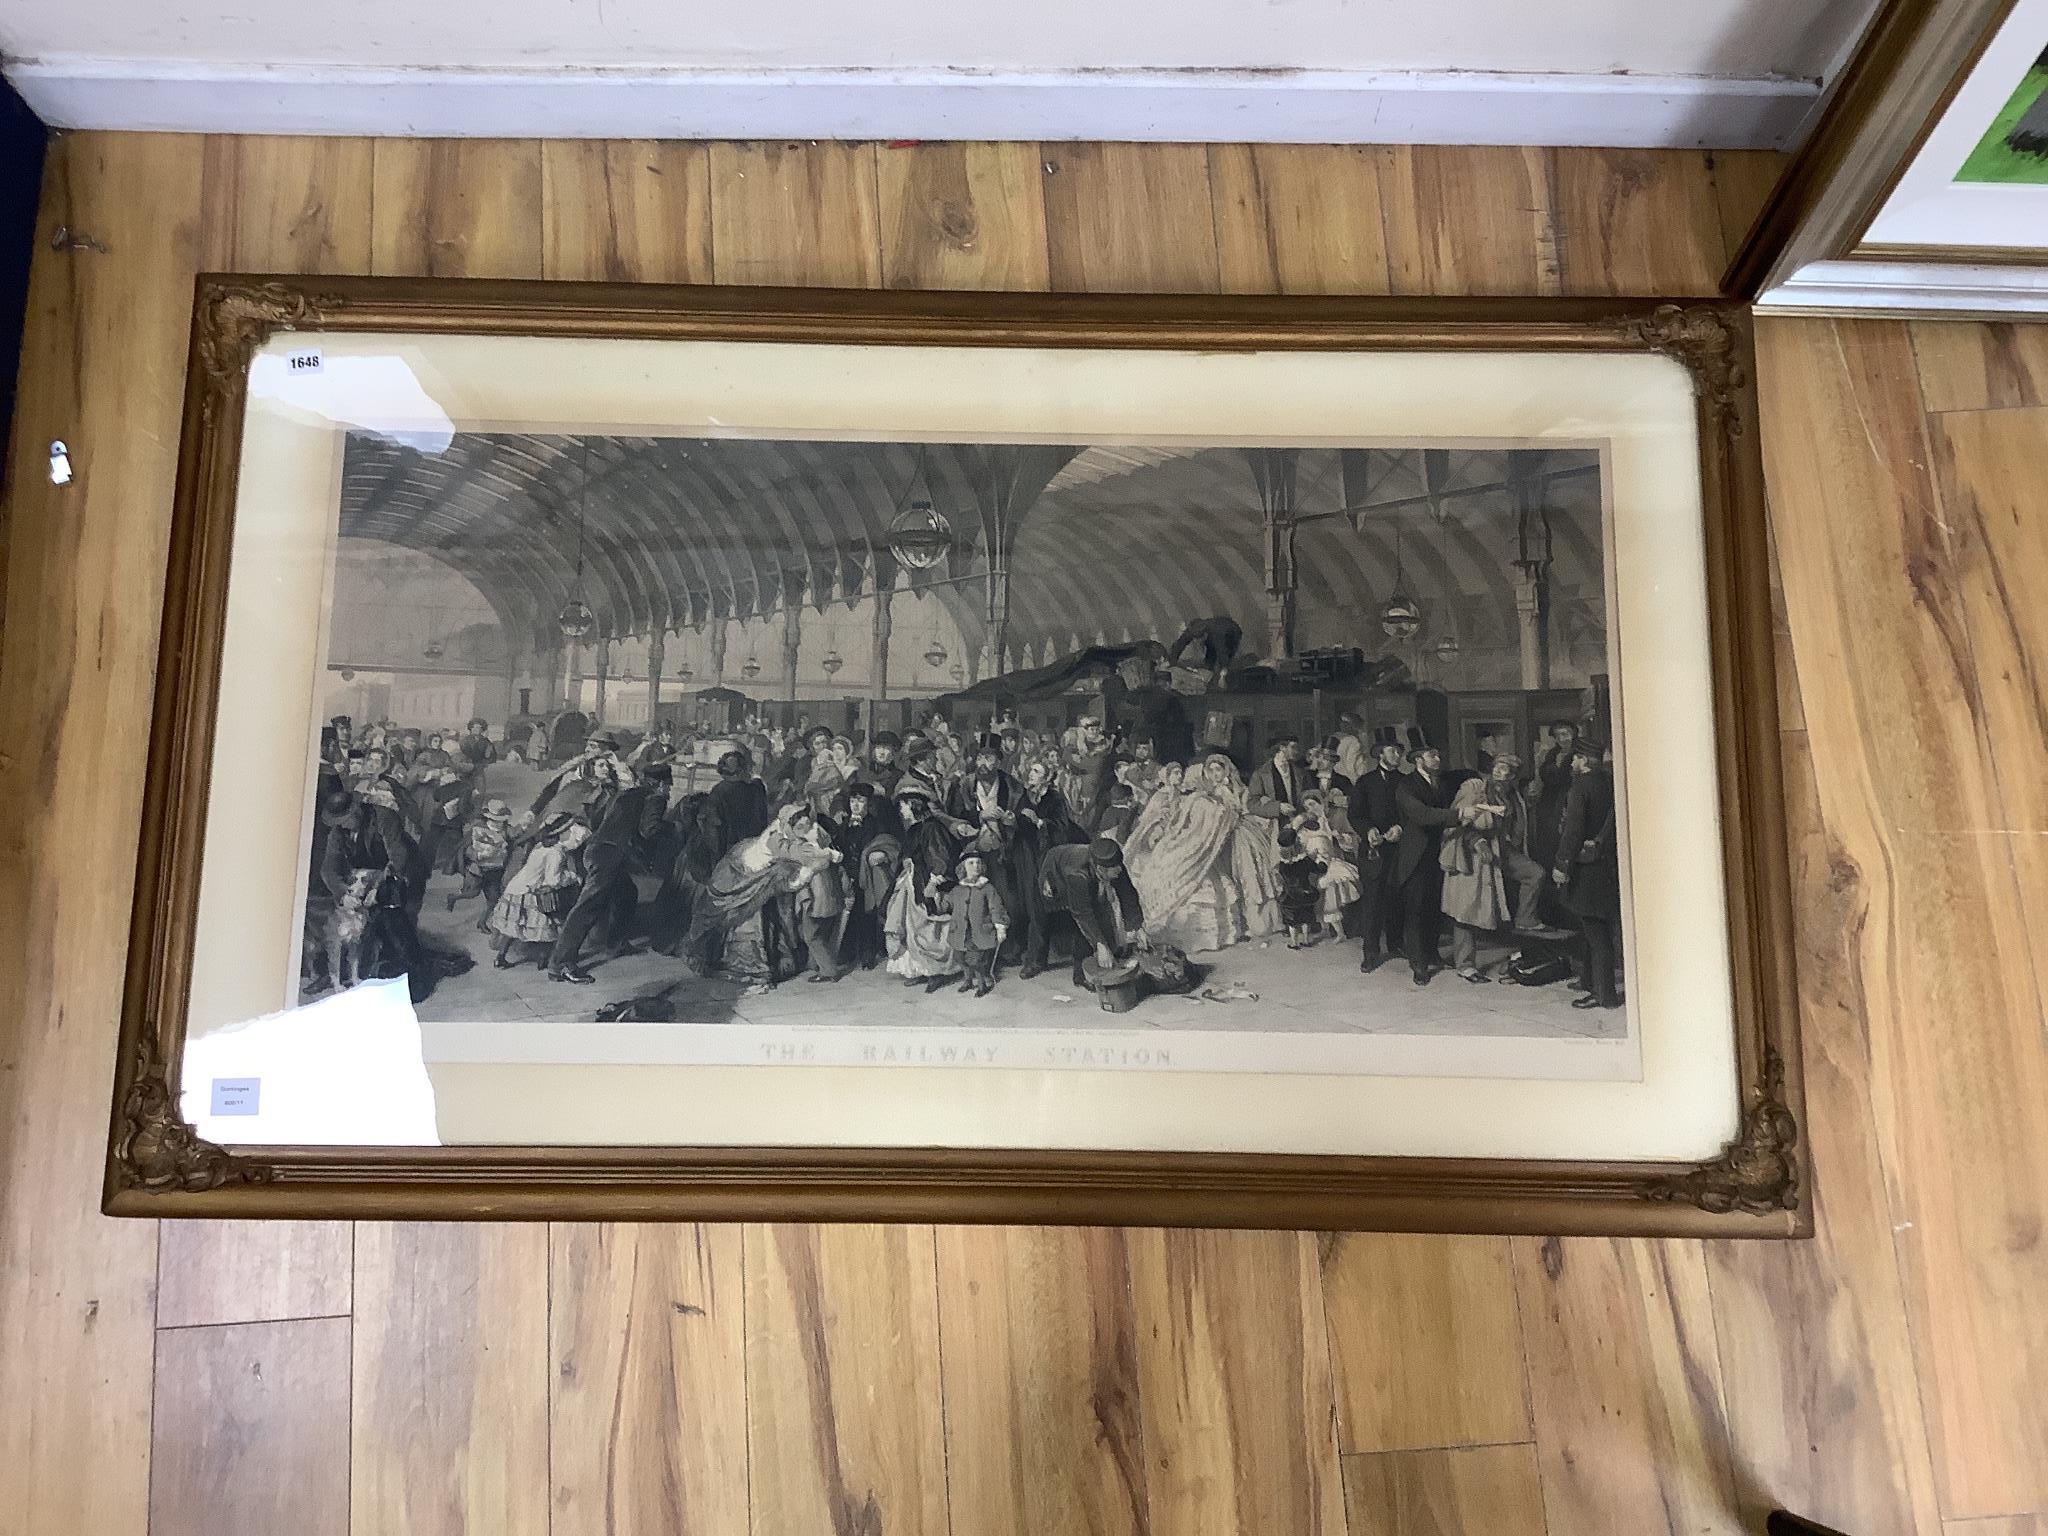 Francis Hall after William Powell Frith, engraving, The Railway Station 47x113cm